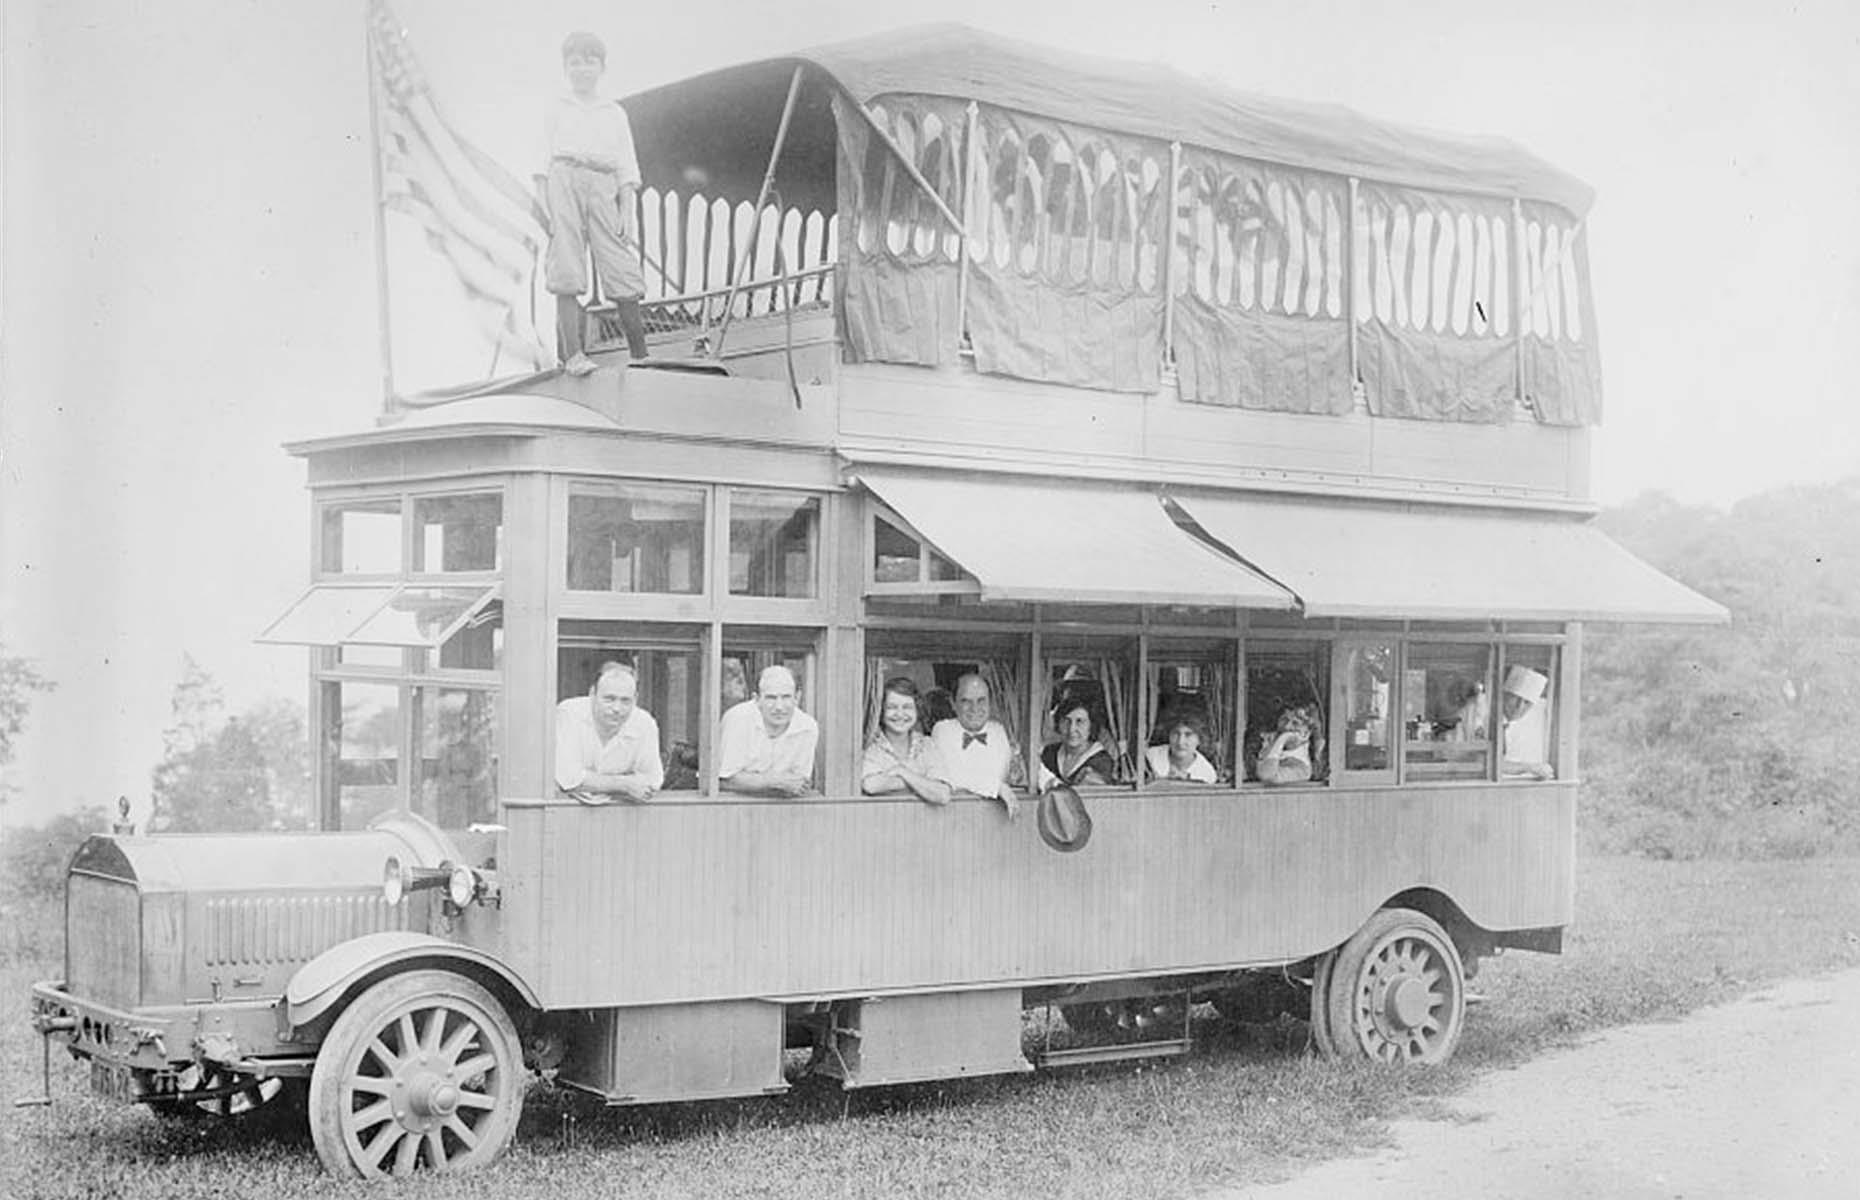 Another early iteration of the RV, which arguably resembles the modern kind even more closely, was made by husband and wife Roland and Mary Conklin. Roland was the president of the Chicago Motor Bus Company and they transformed a regular bus into a swish motorhome fit for a cross-country tour.